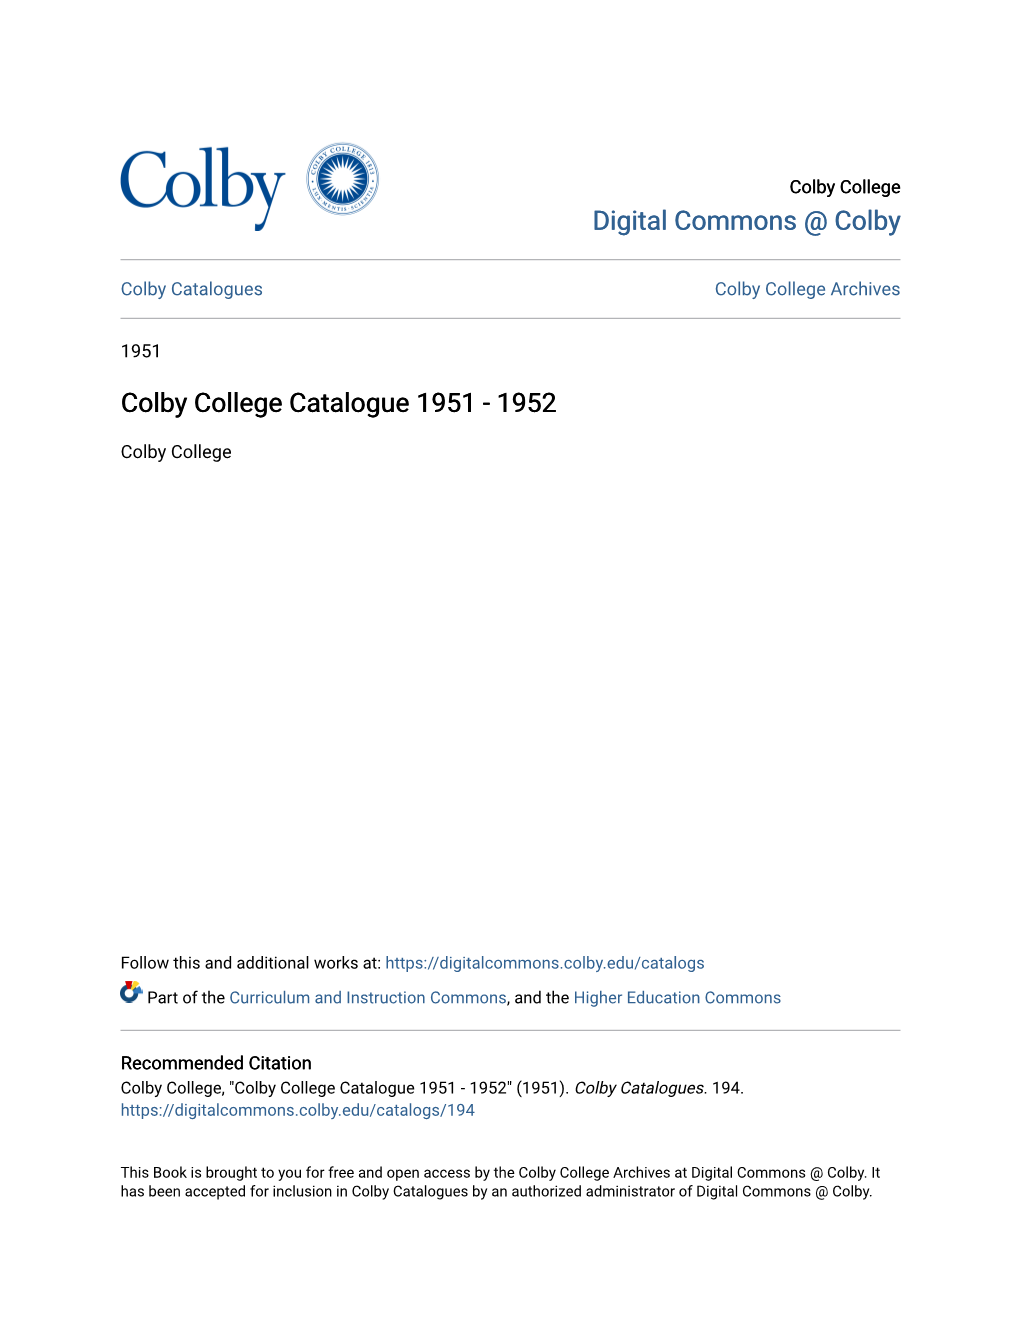 Colby College Catalogue 1951 - 1952